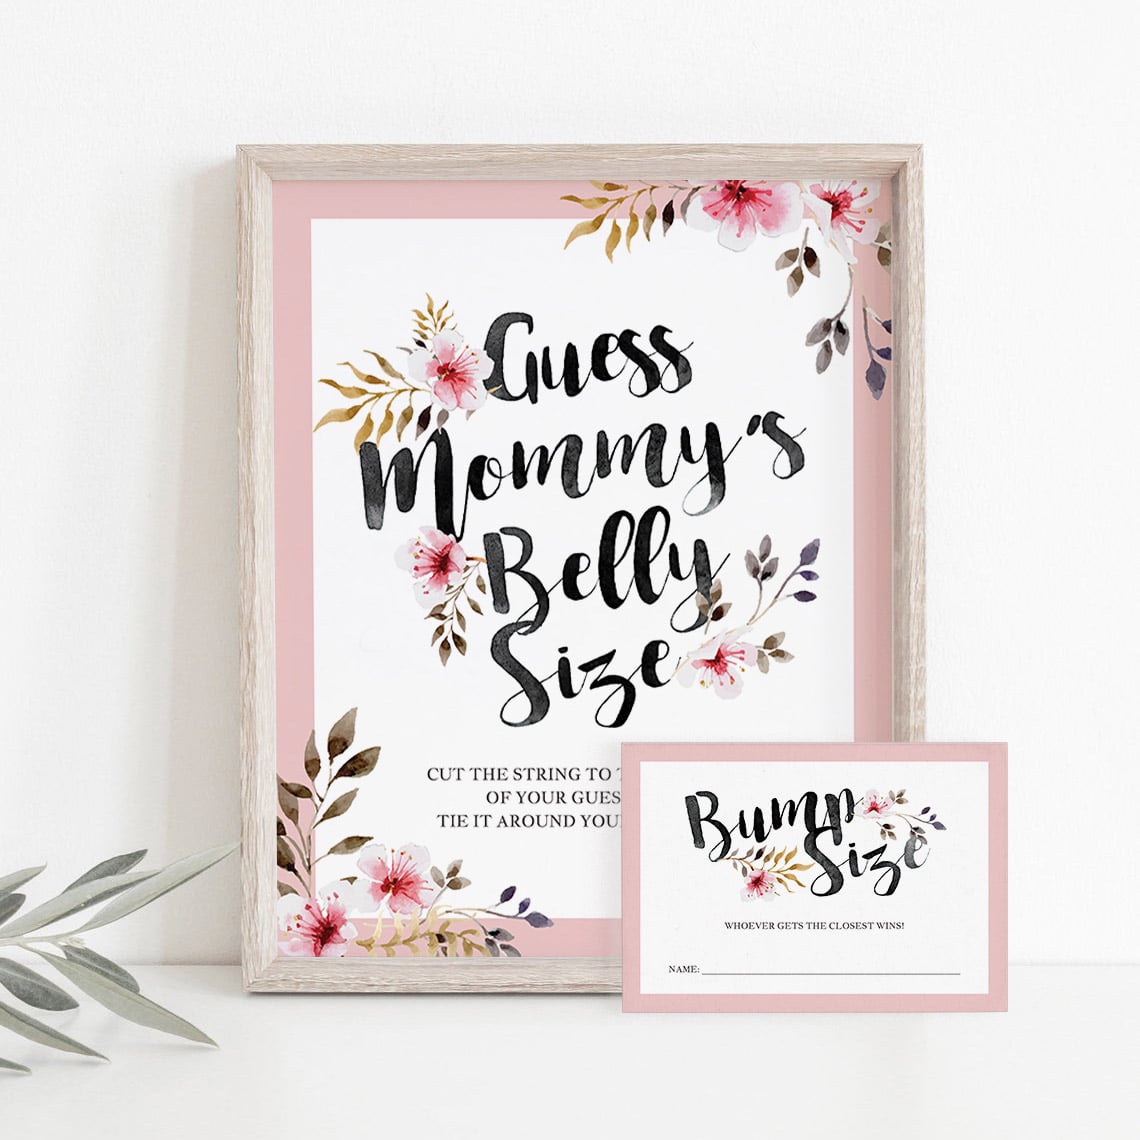 Printable blush pink baby shower guess the belly size game by LittleSizzle